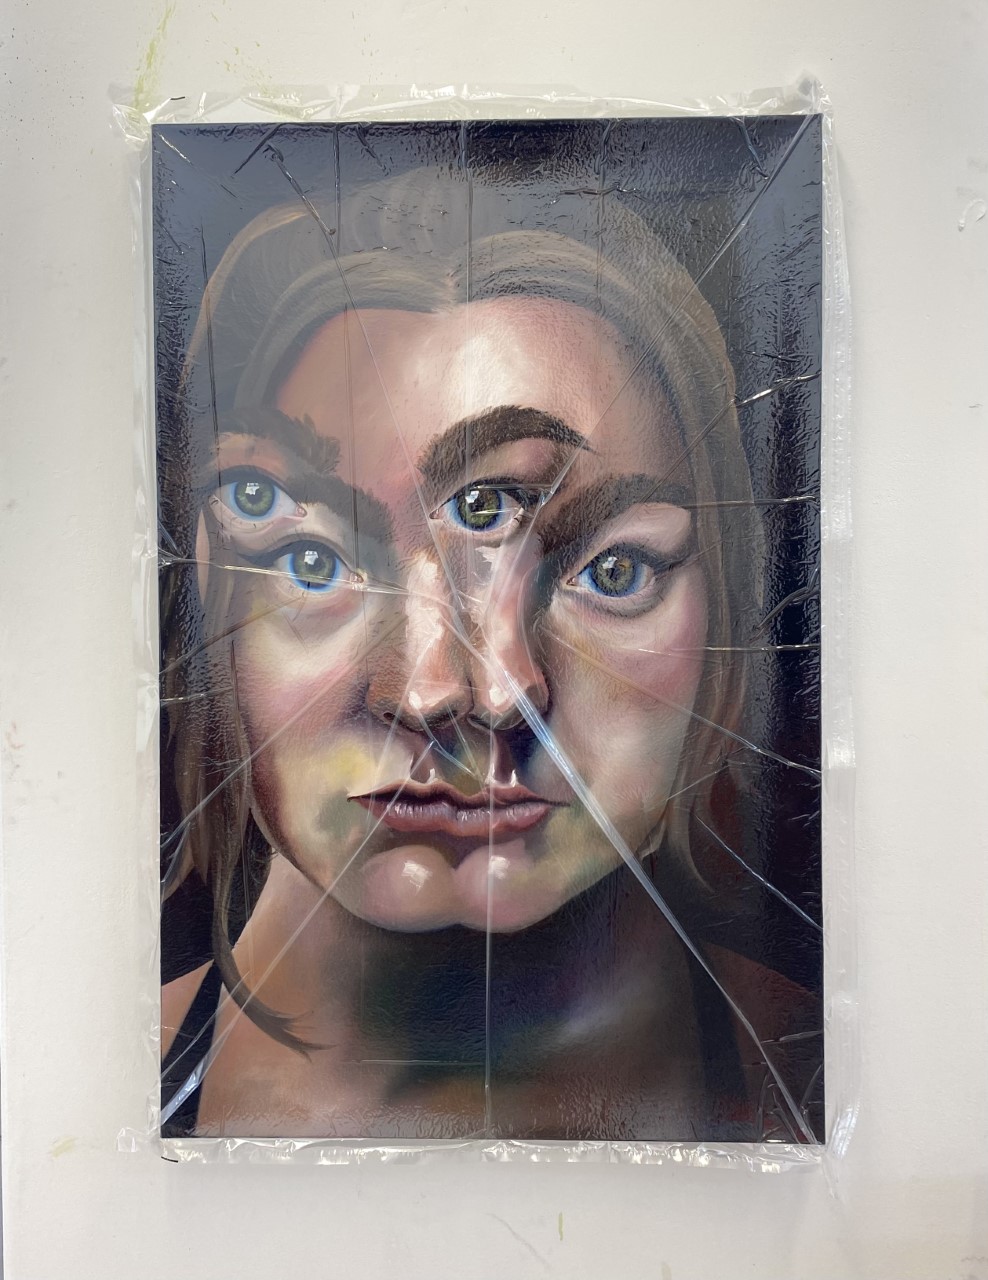 Image of oil painting on a canvas by graduate Poppy Smith. Painting is of a women's face that appears to be distorted by a smashing mirror effect